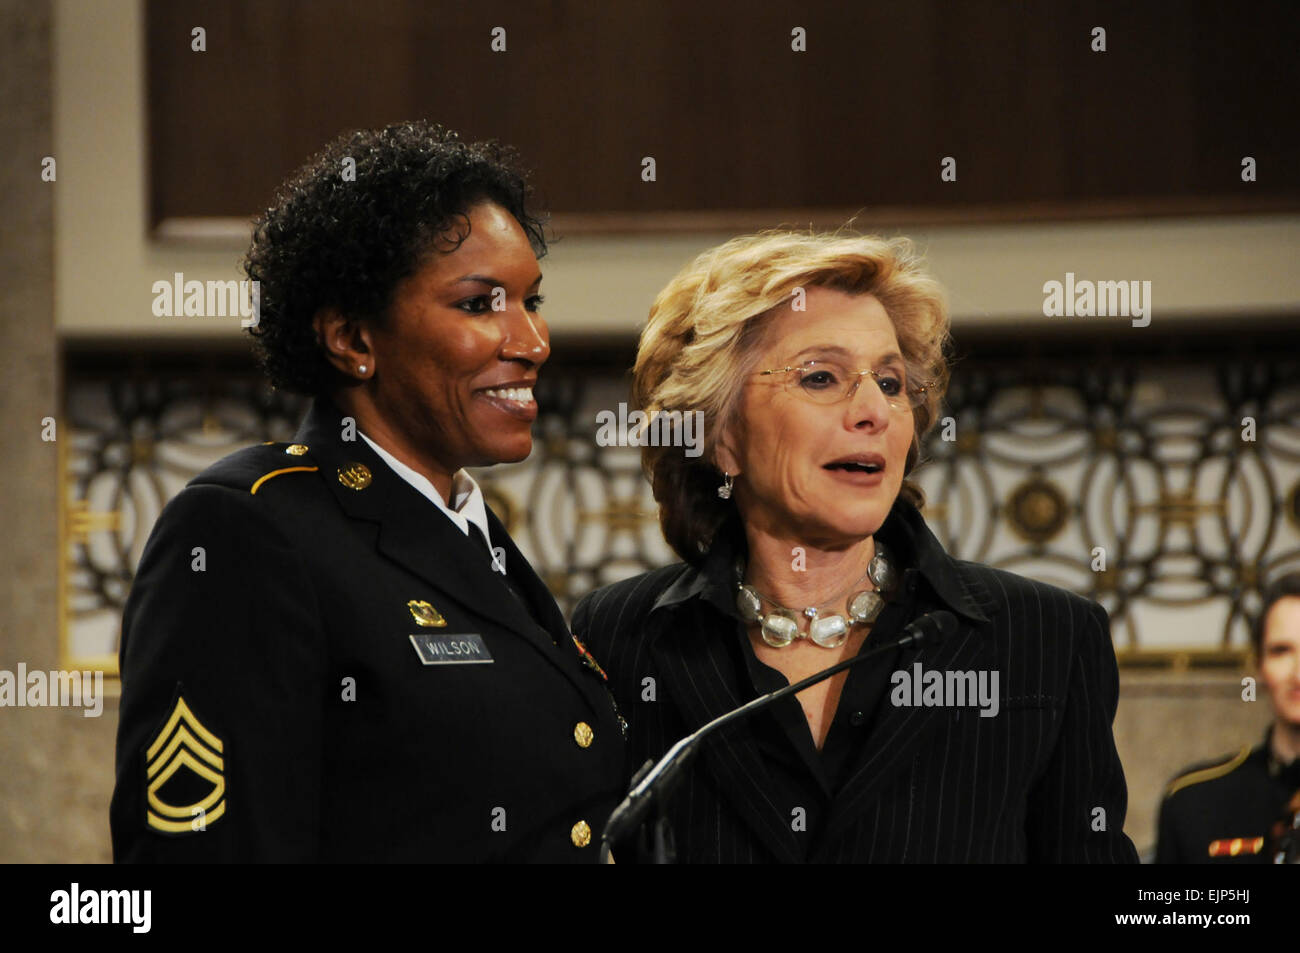 Sen. Barbara Boxer of California, right, presents a Senate Resolution to recognize the accomplishments of women in the military to Sgt. 1st Class Juanita Wilson, a wounded warrior, during the Joint Services Women's History Month Observance on Capitol Hill Thursday.&quot;          Senate resolution celebrates women in military  /-news/2010/03/05/35411-senate-resolution-celebrates-women-in-military/index.html Stock Photo